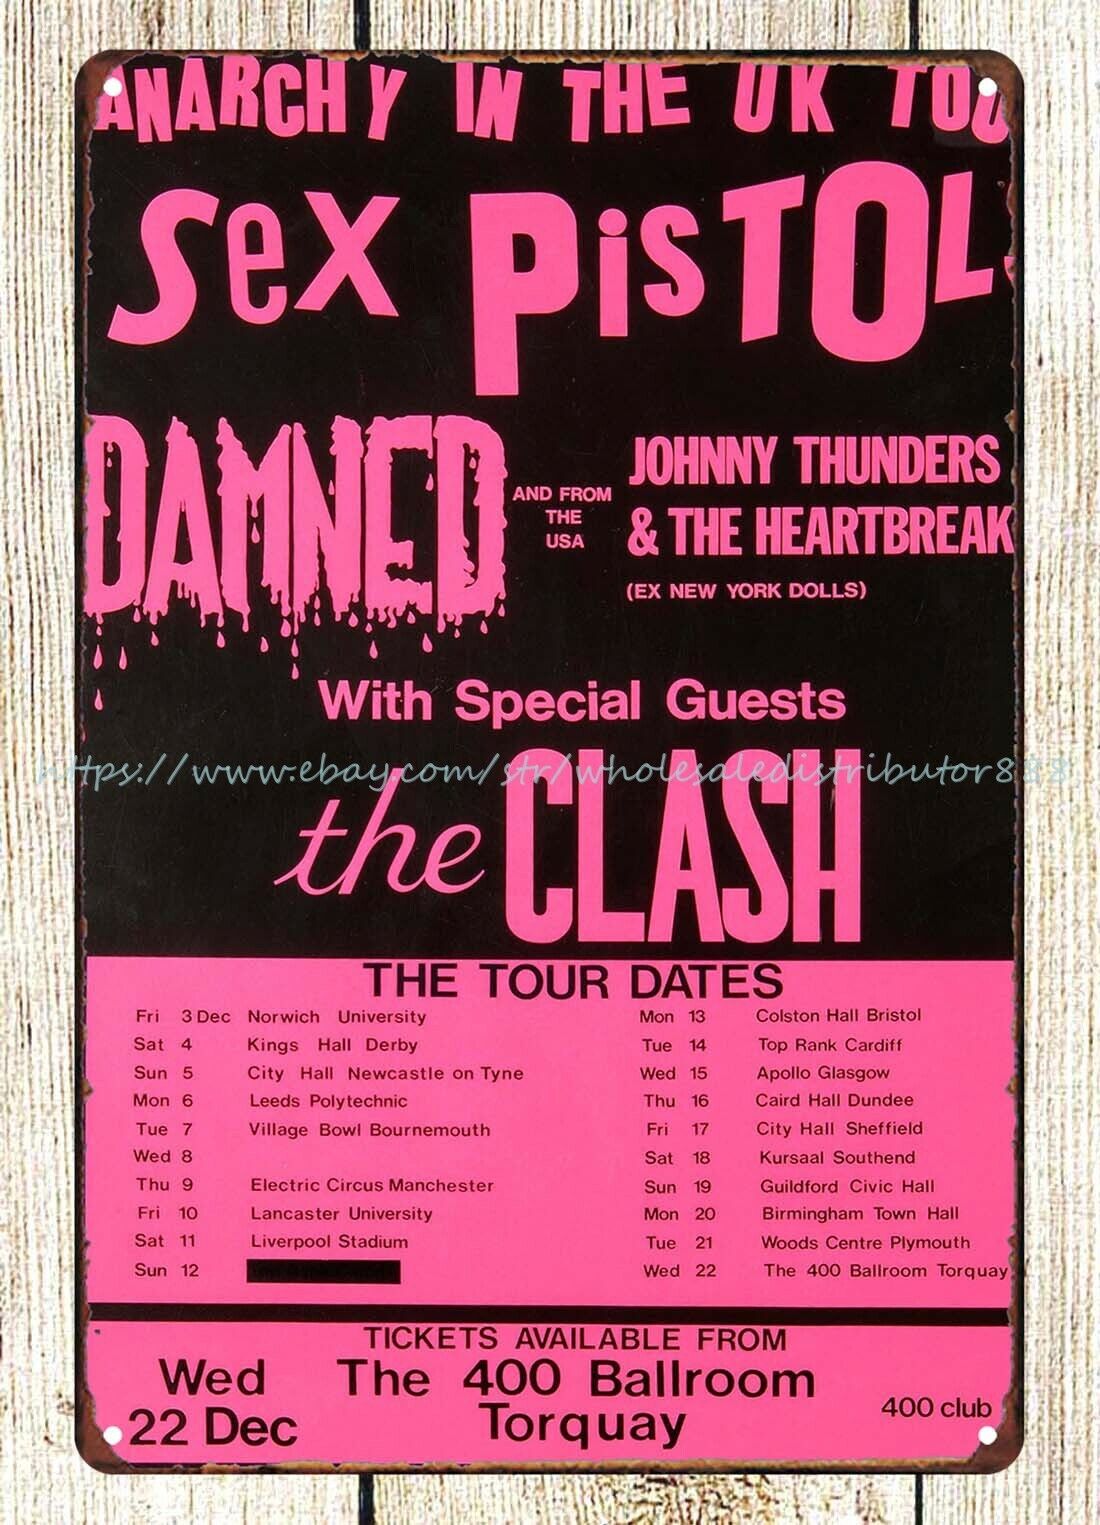 1976 Sex Pistols, The Clash, Damned, Johnny Thunders Anarchy UK Tour Poster eBay picture